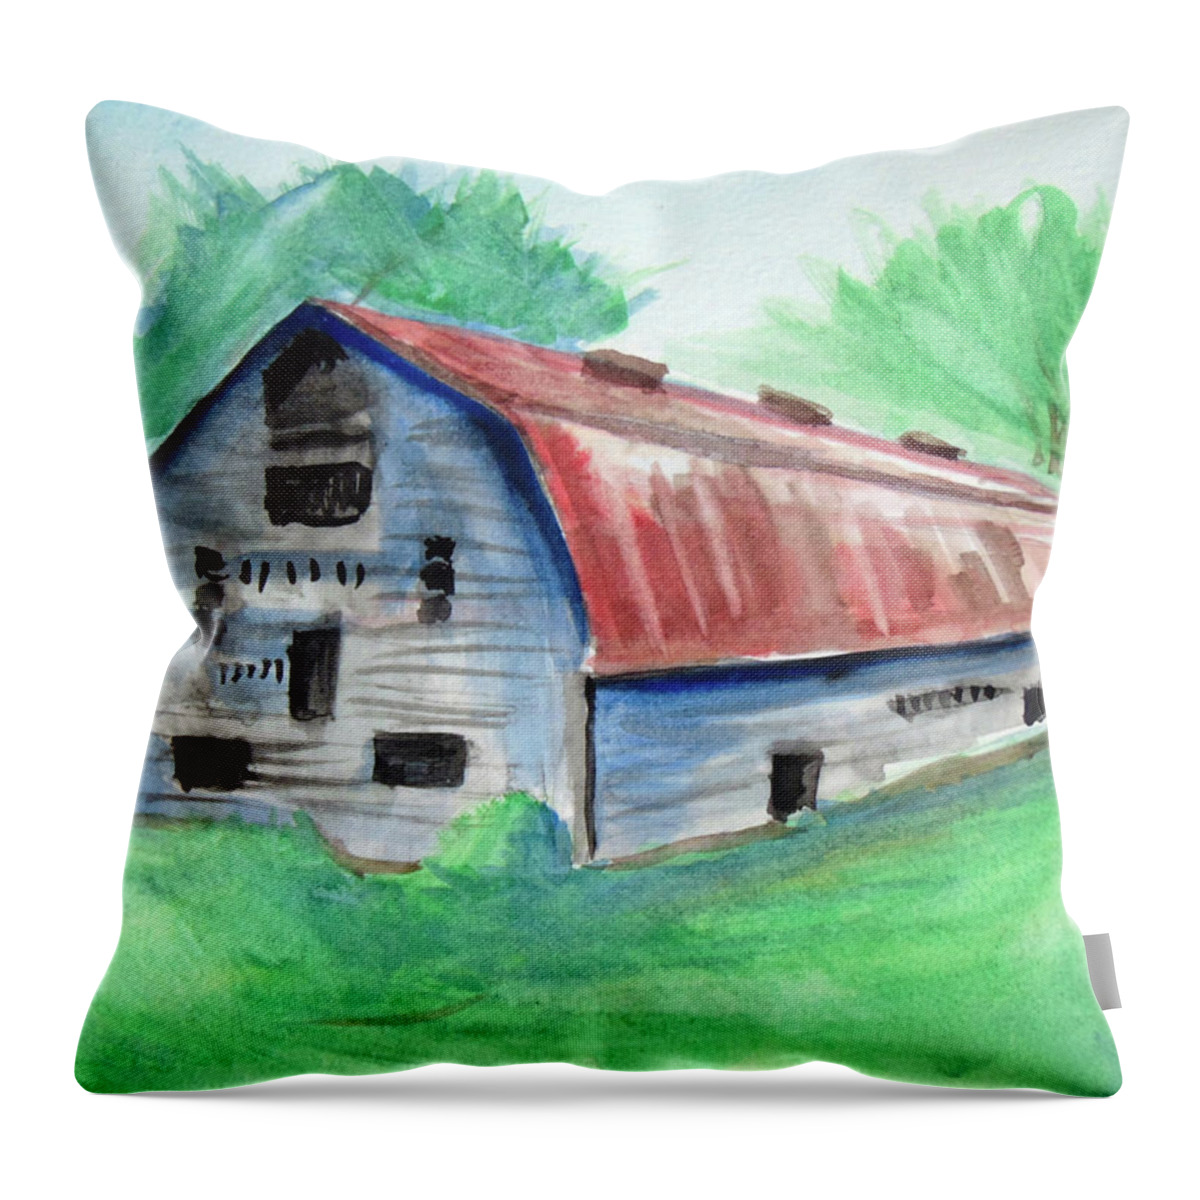 Barn Throw Pillow featuring the painting Fancher Barn by Loretta Nash